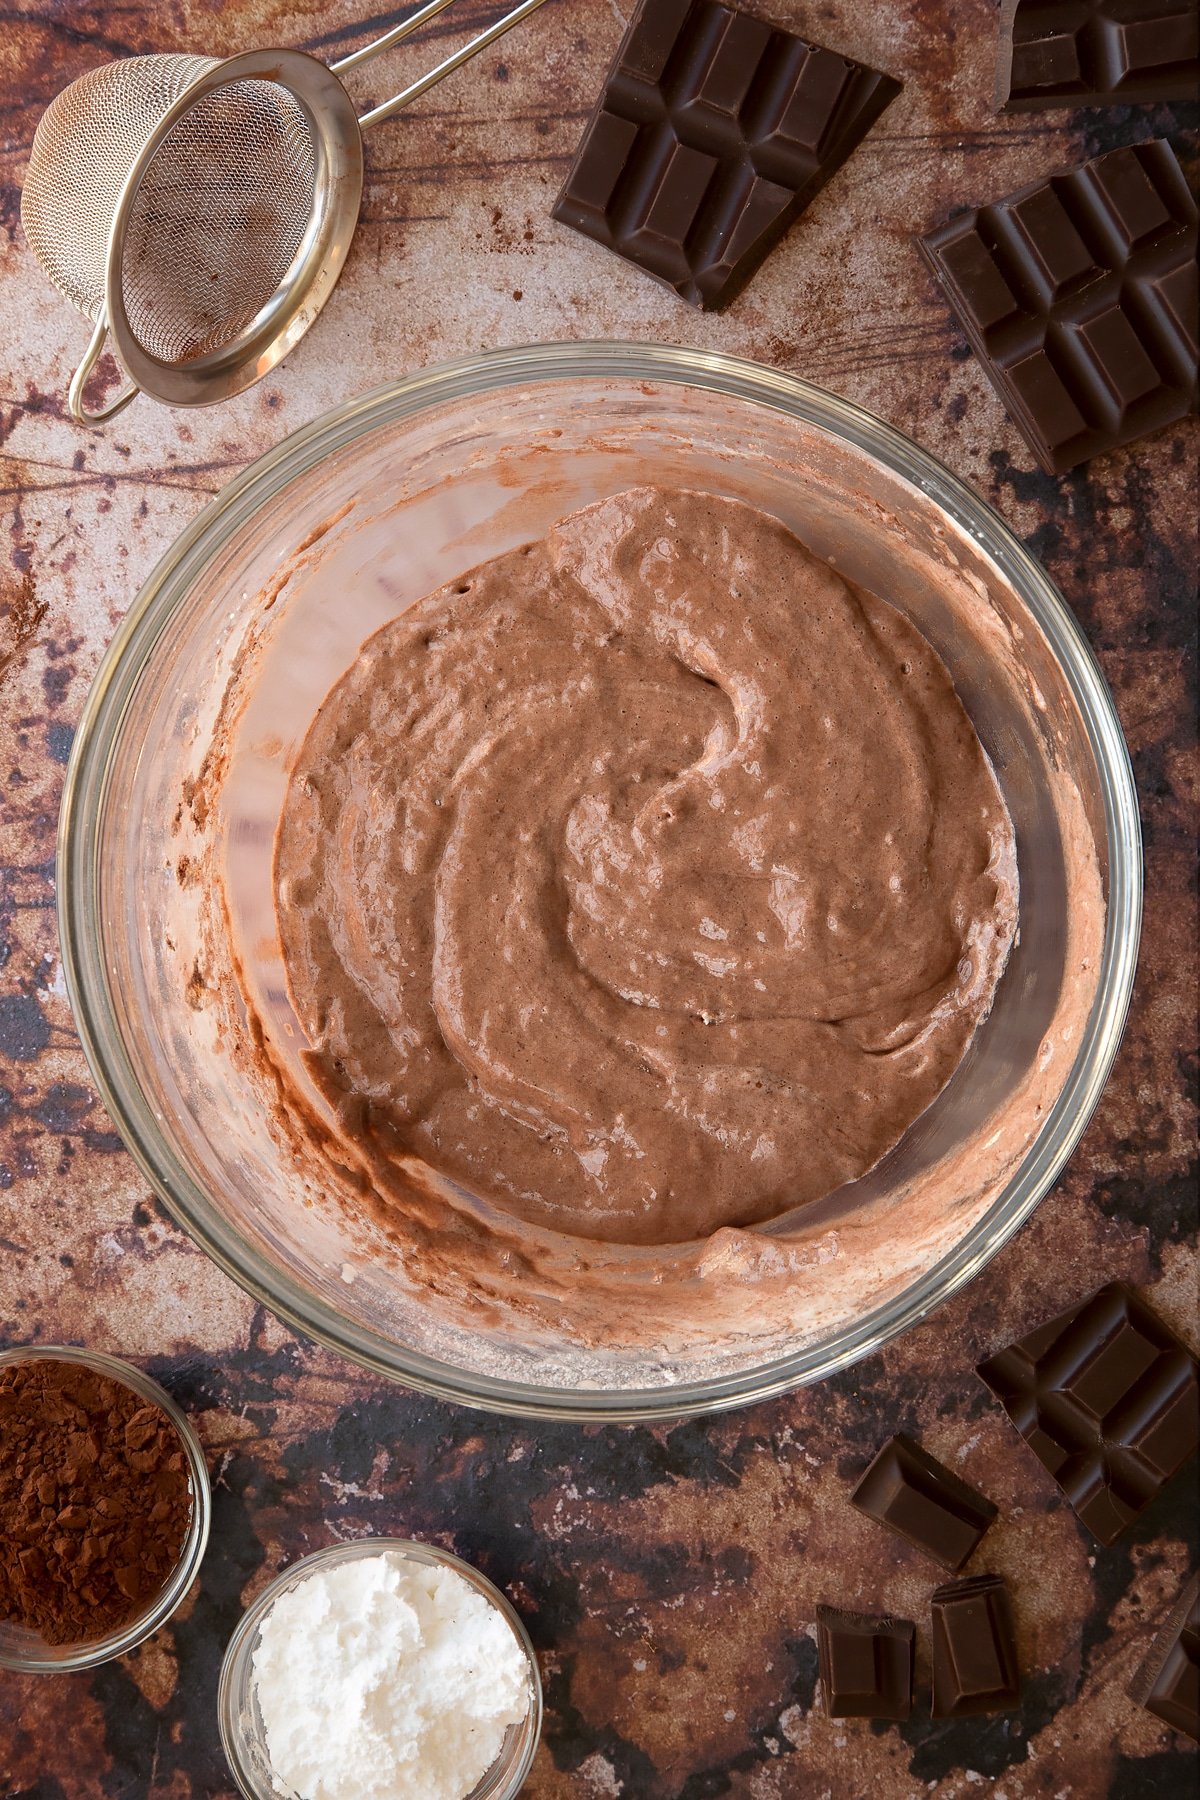 Chocolate sponge batter in a bowl. Ingredients to make chocolate Swiss roll surround the bowl.